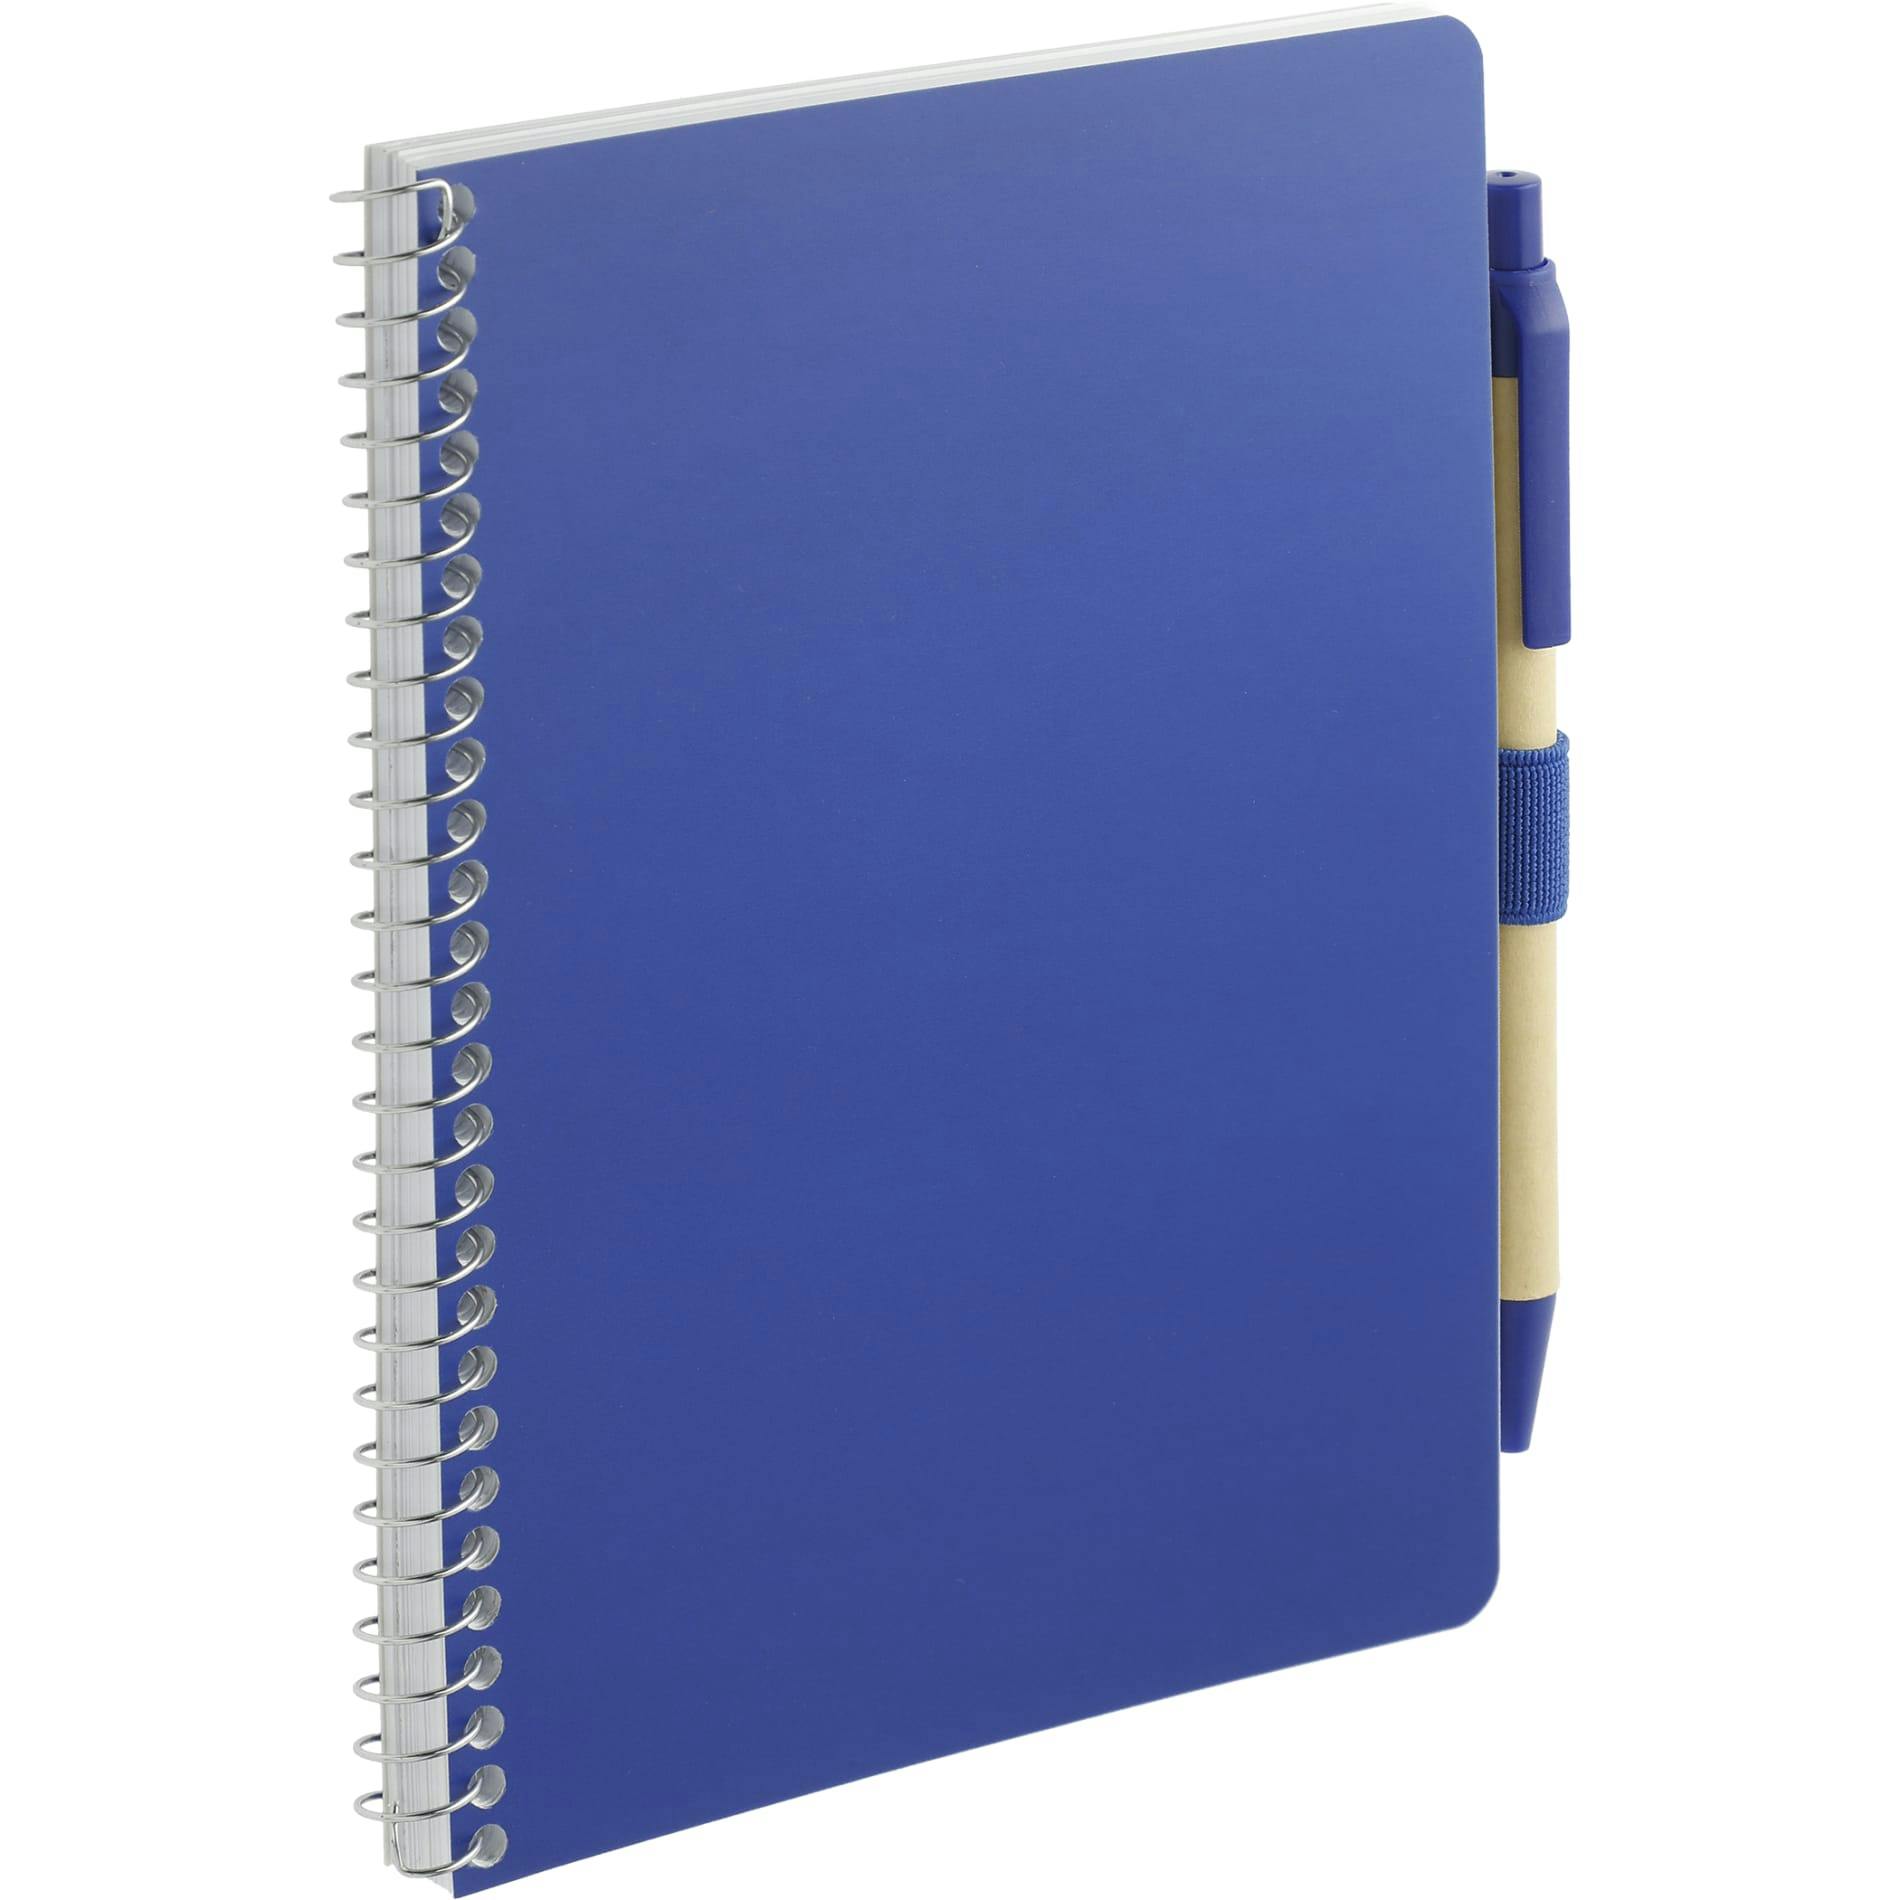 5” x 7” FSC® Mix Spiral Notebook with Pen - additional Image 2